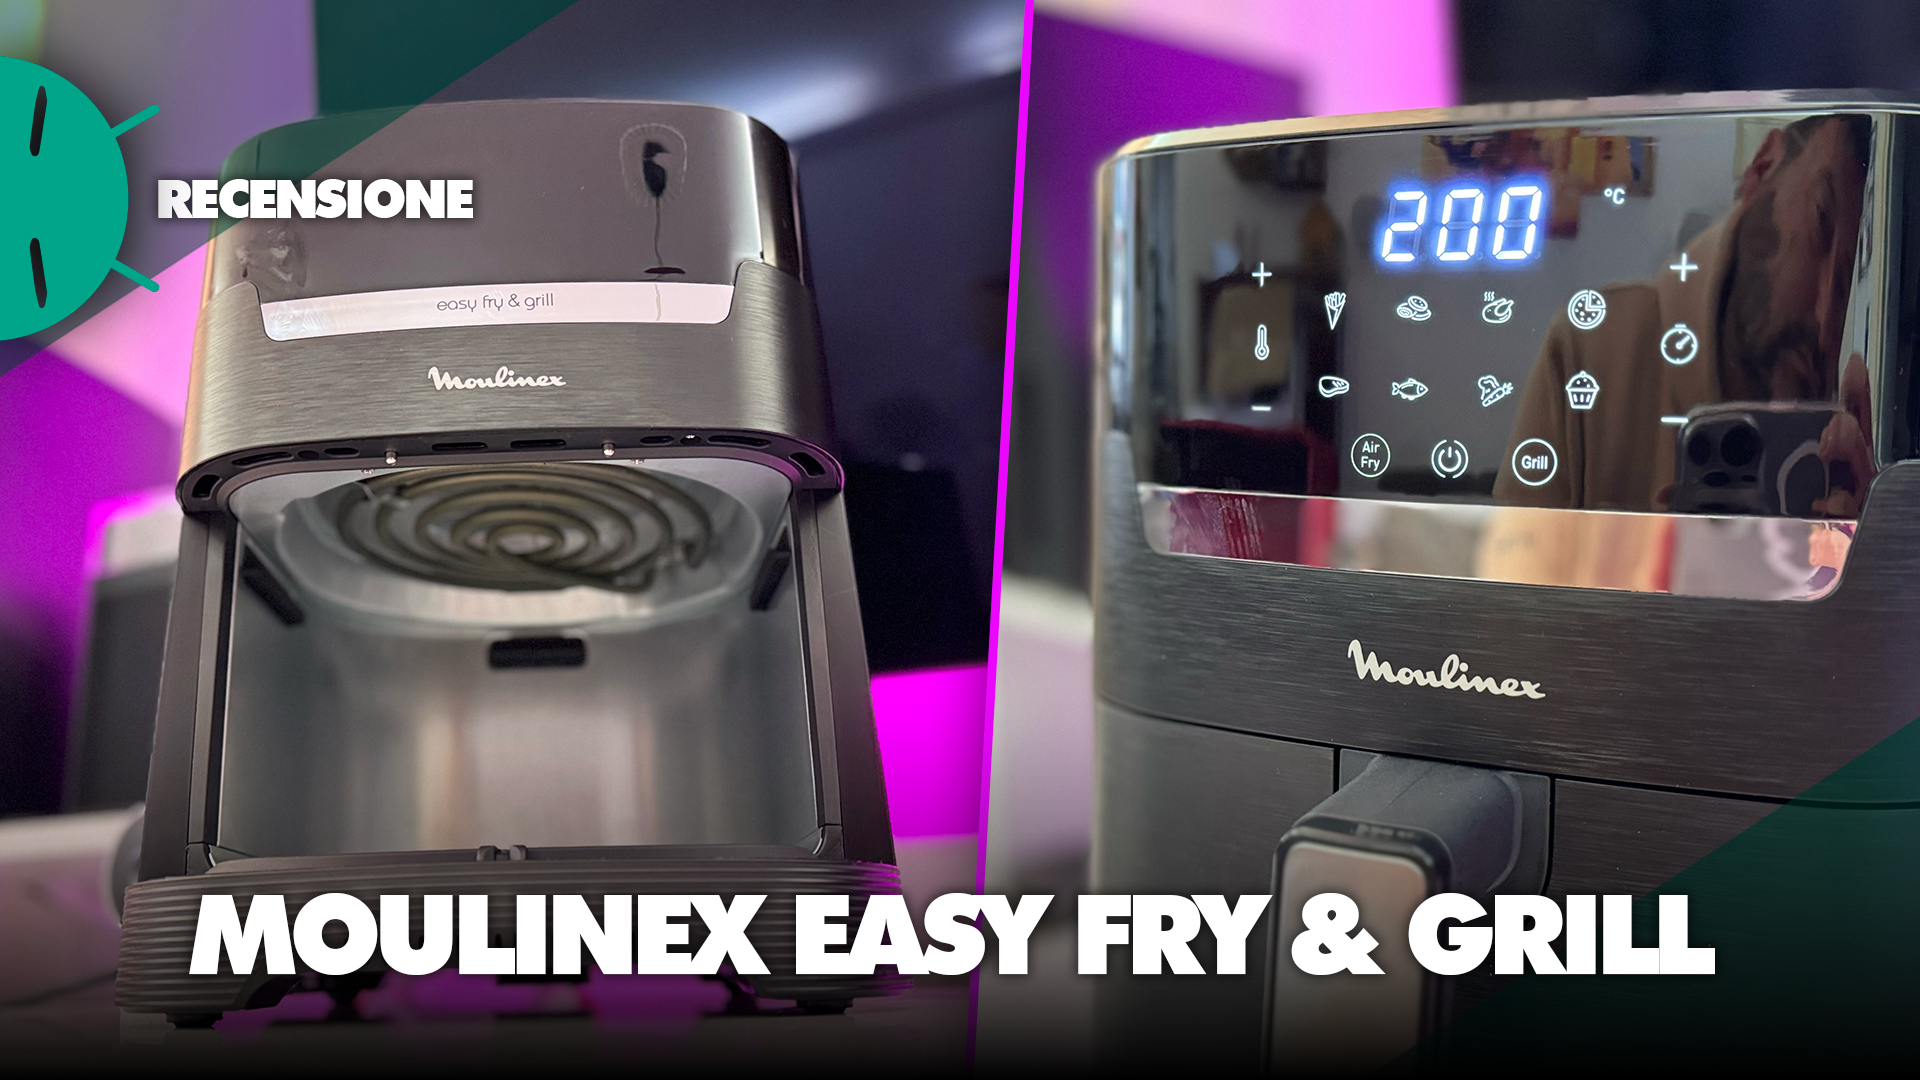 Moulinex Easy Fry Air Fryer Oven 20 L / REVIEW✓🎄🎅 